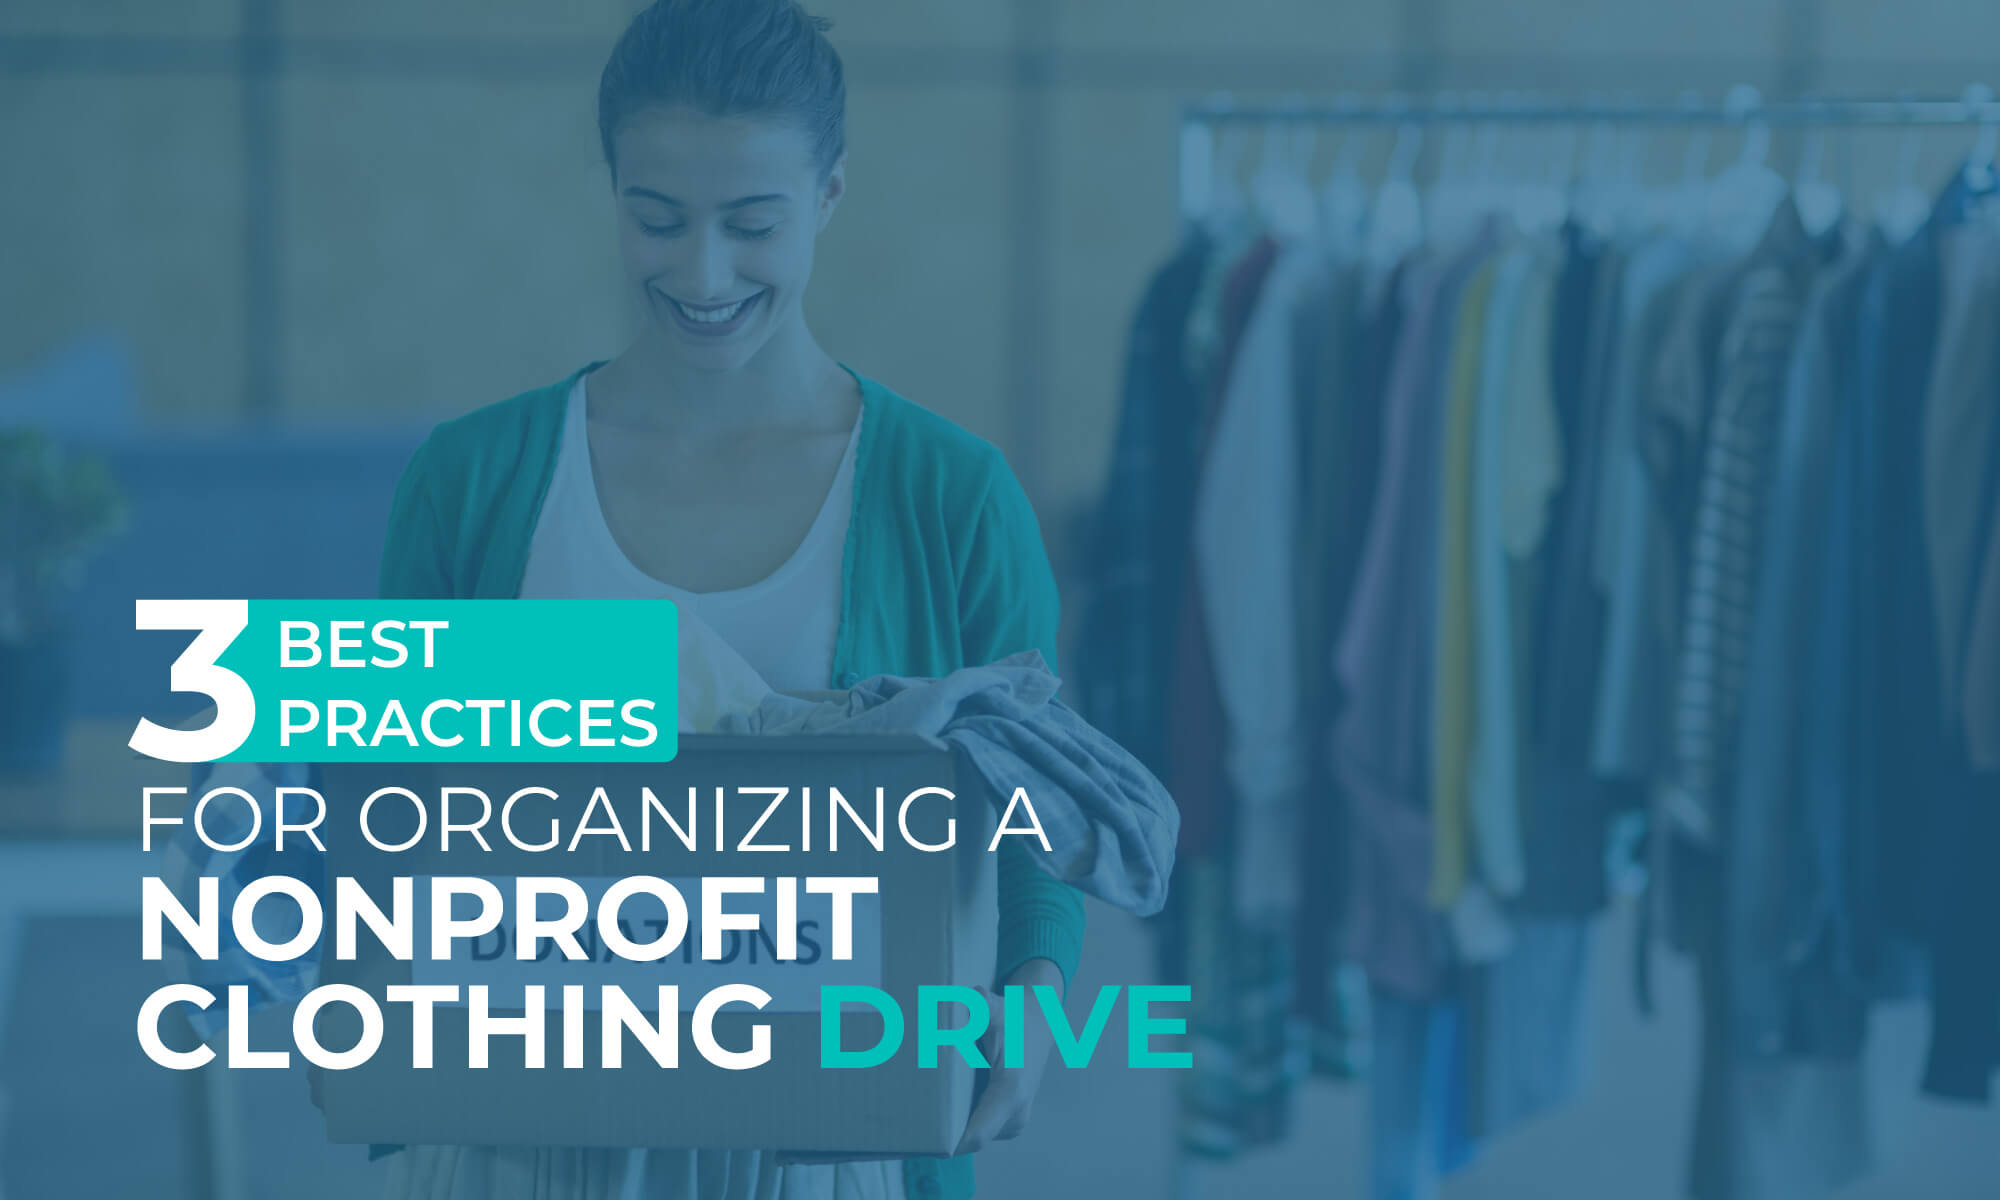 This article will discuss three best practices for organizing a nonprofit clothing drive.